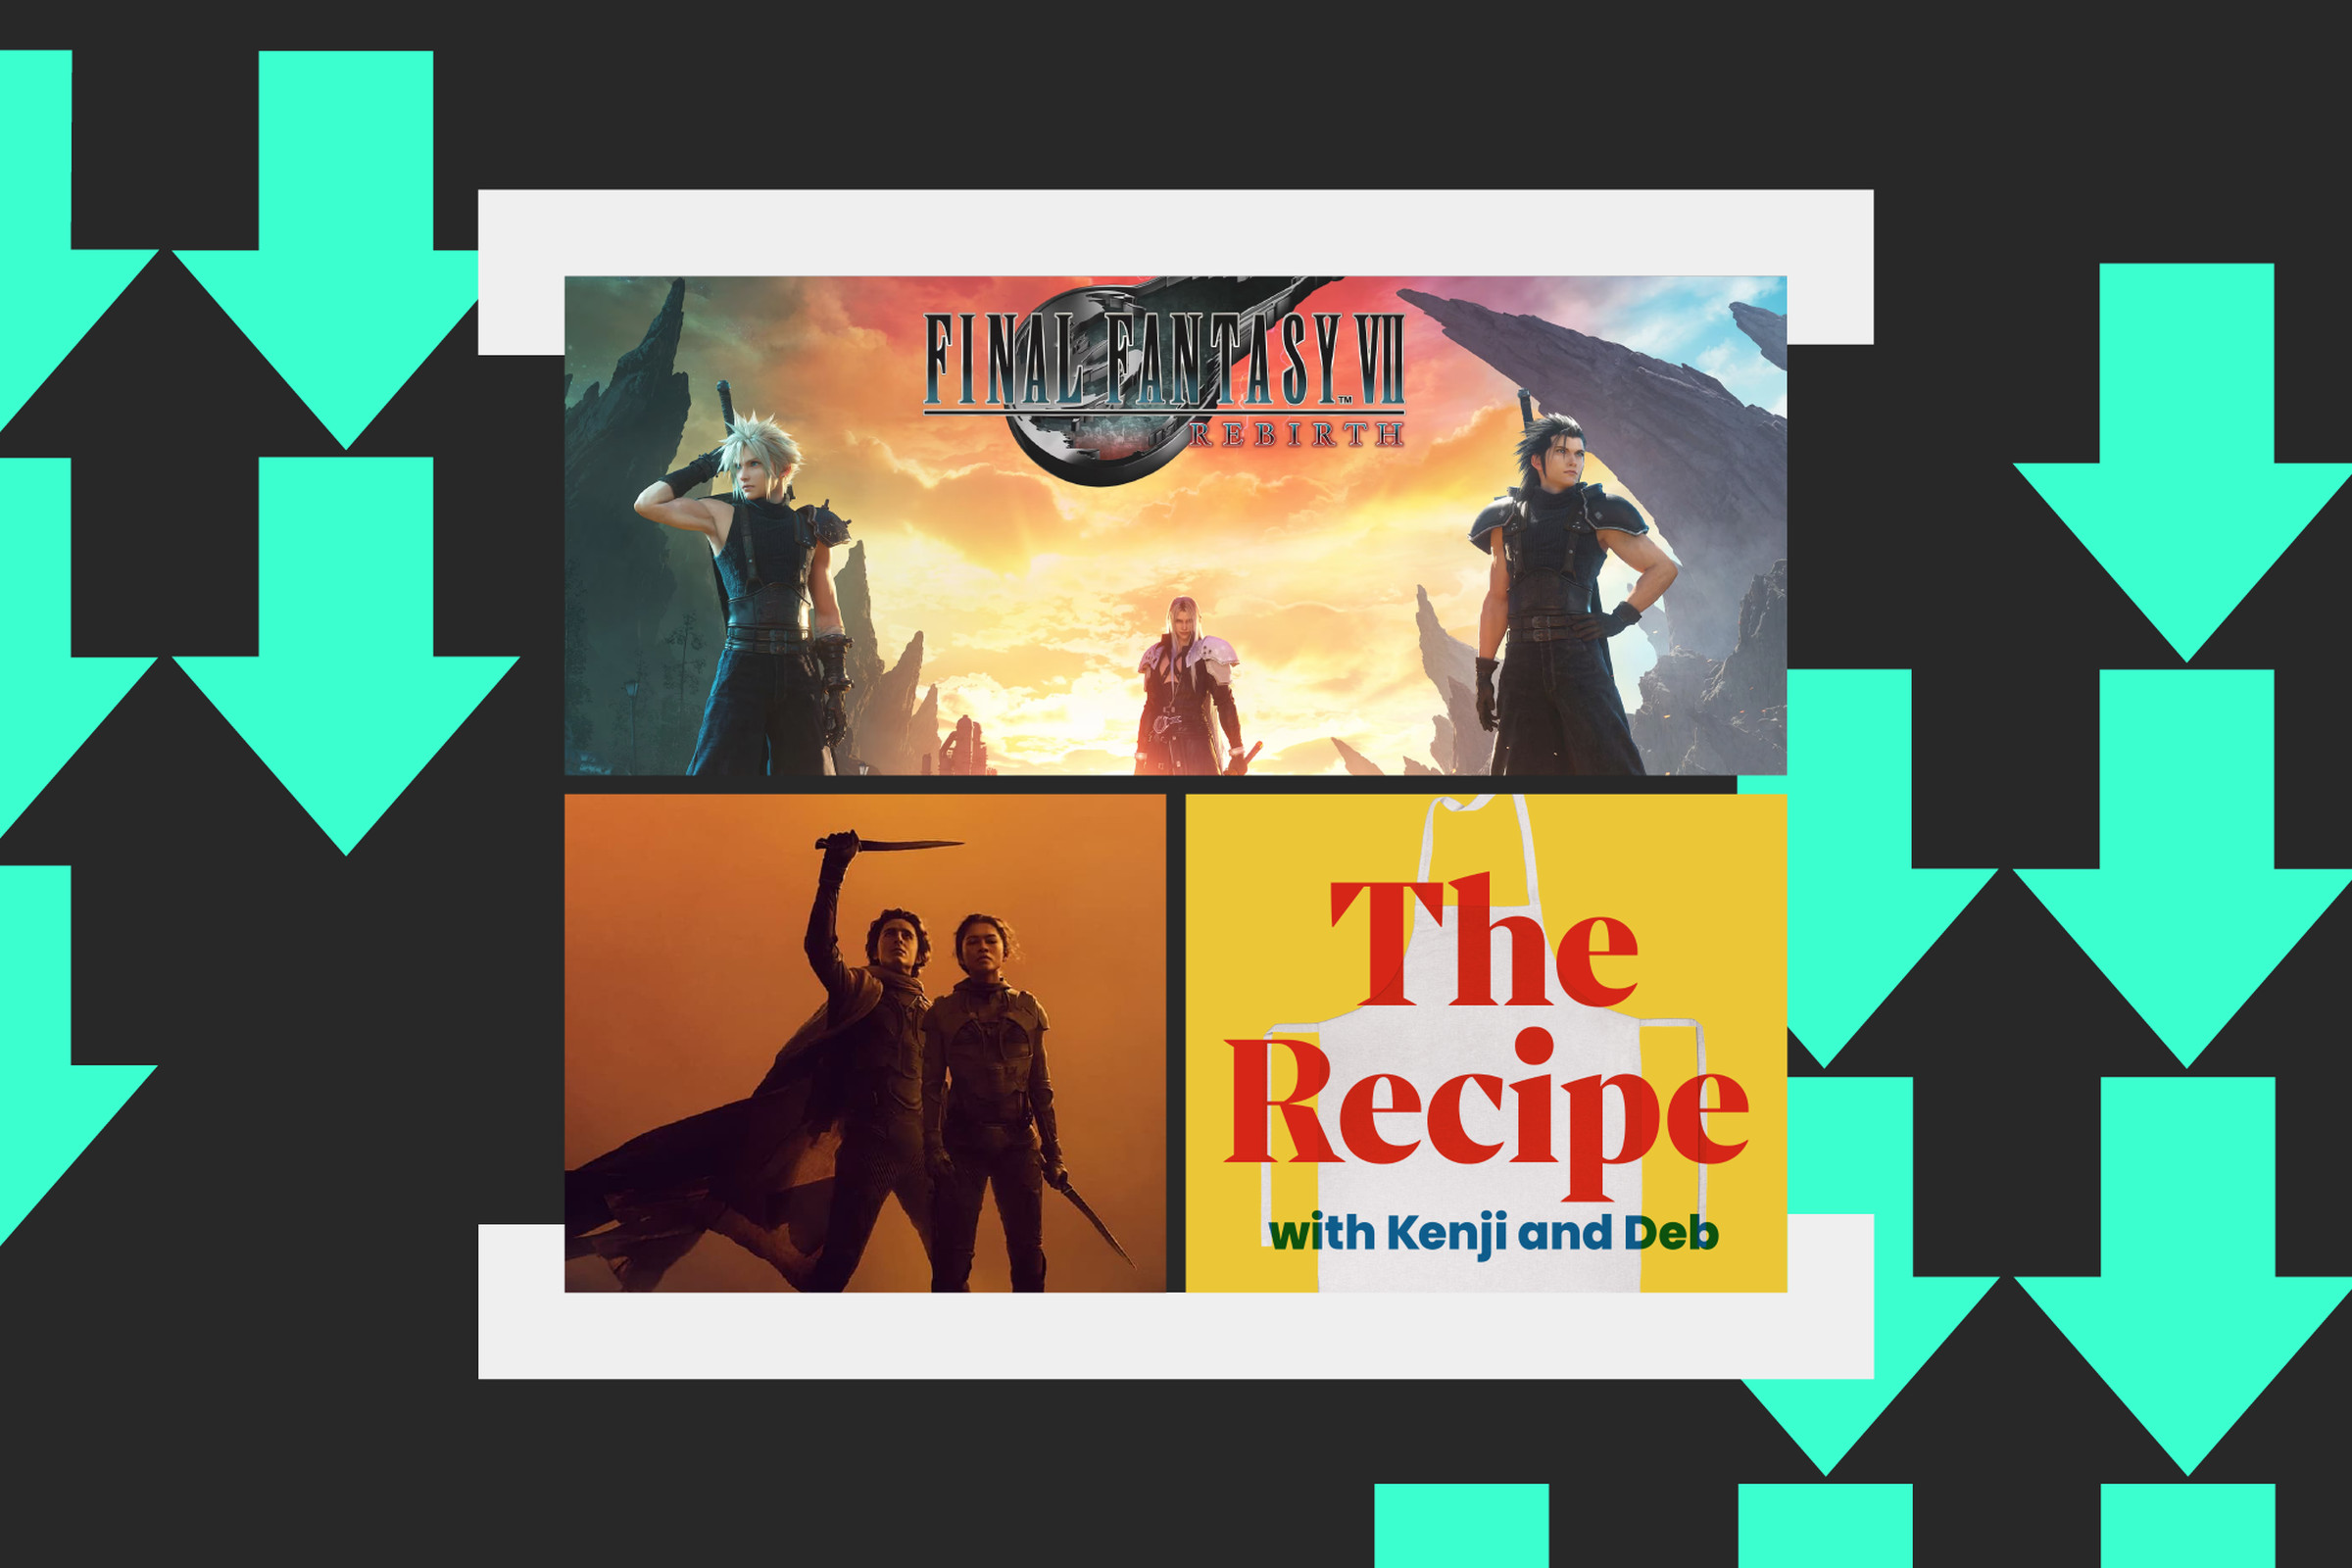 Photo collage of Dune, Final Fantasy, and the Recipe podcast art.